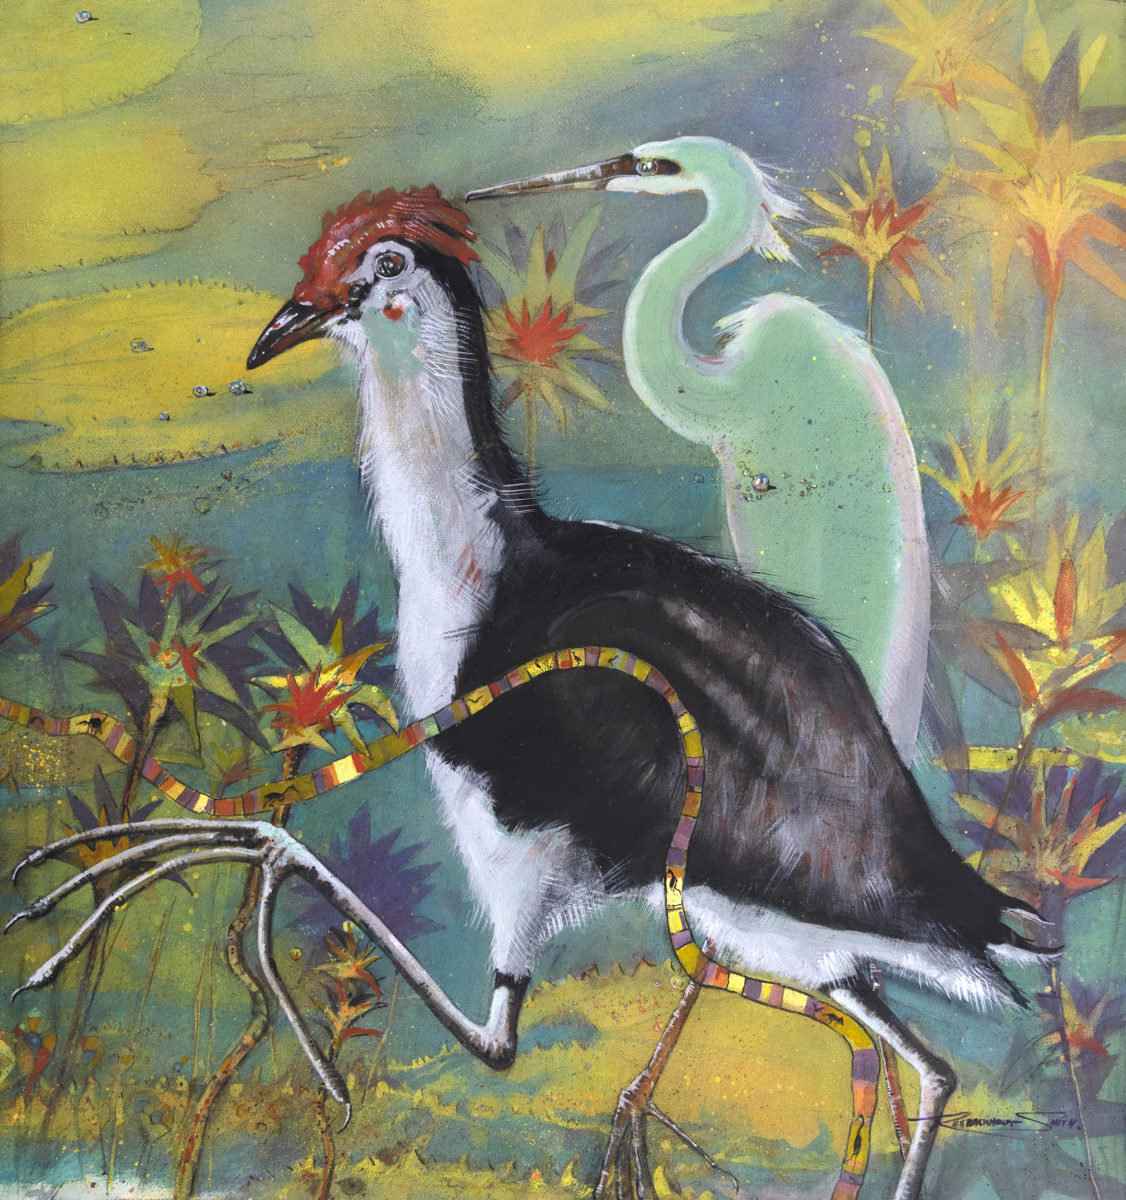 Jacana Yellow Waters | Rex Backhaus-Smith | Watercolour on paper | 127 x 121 cm, framed in white under art glass | $6500